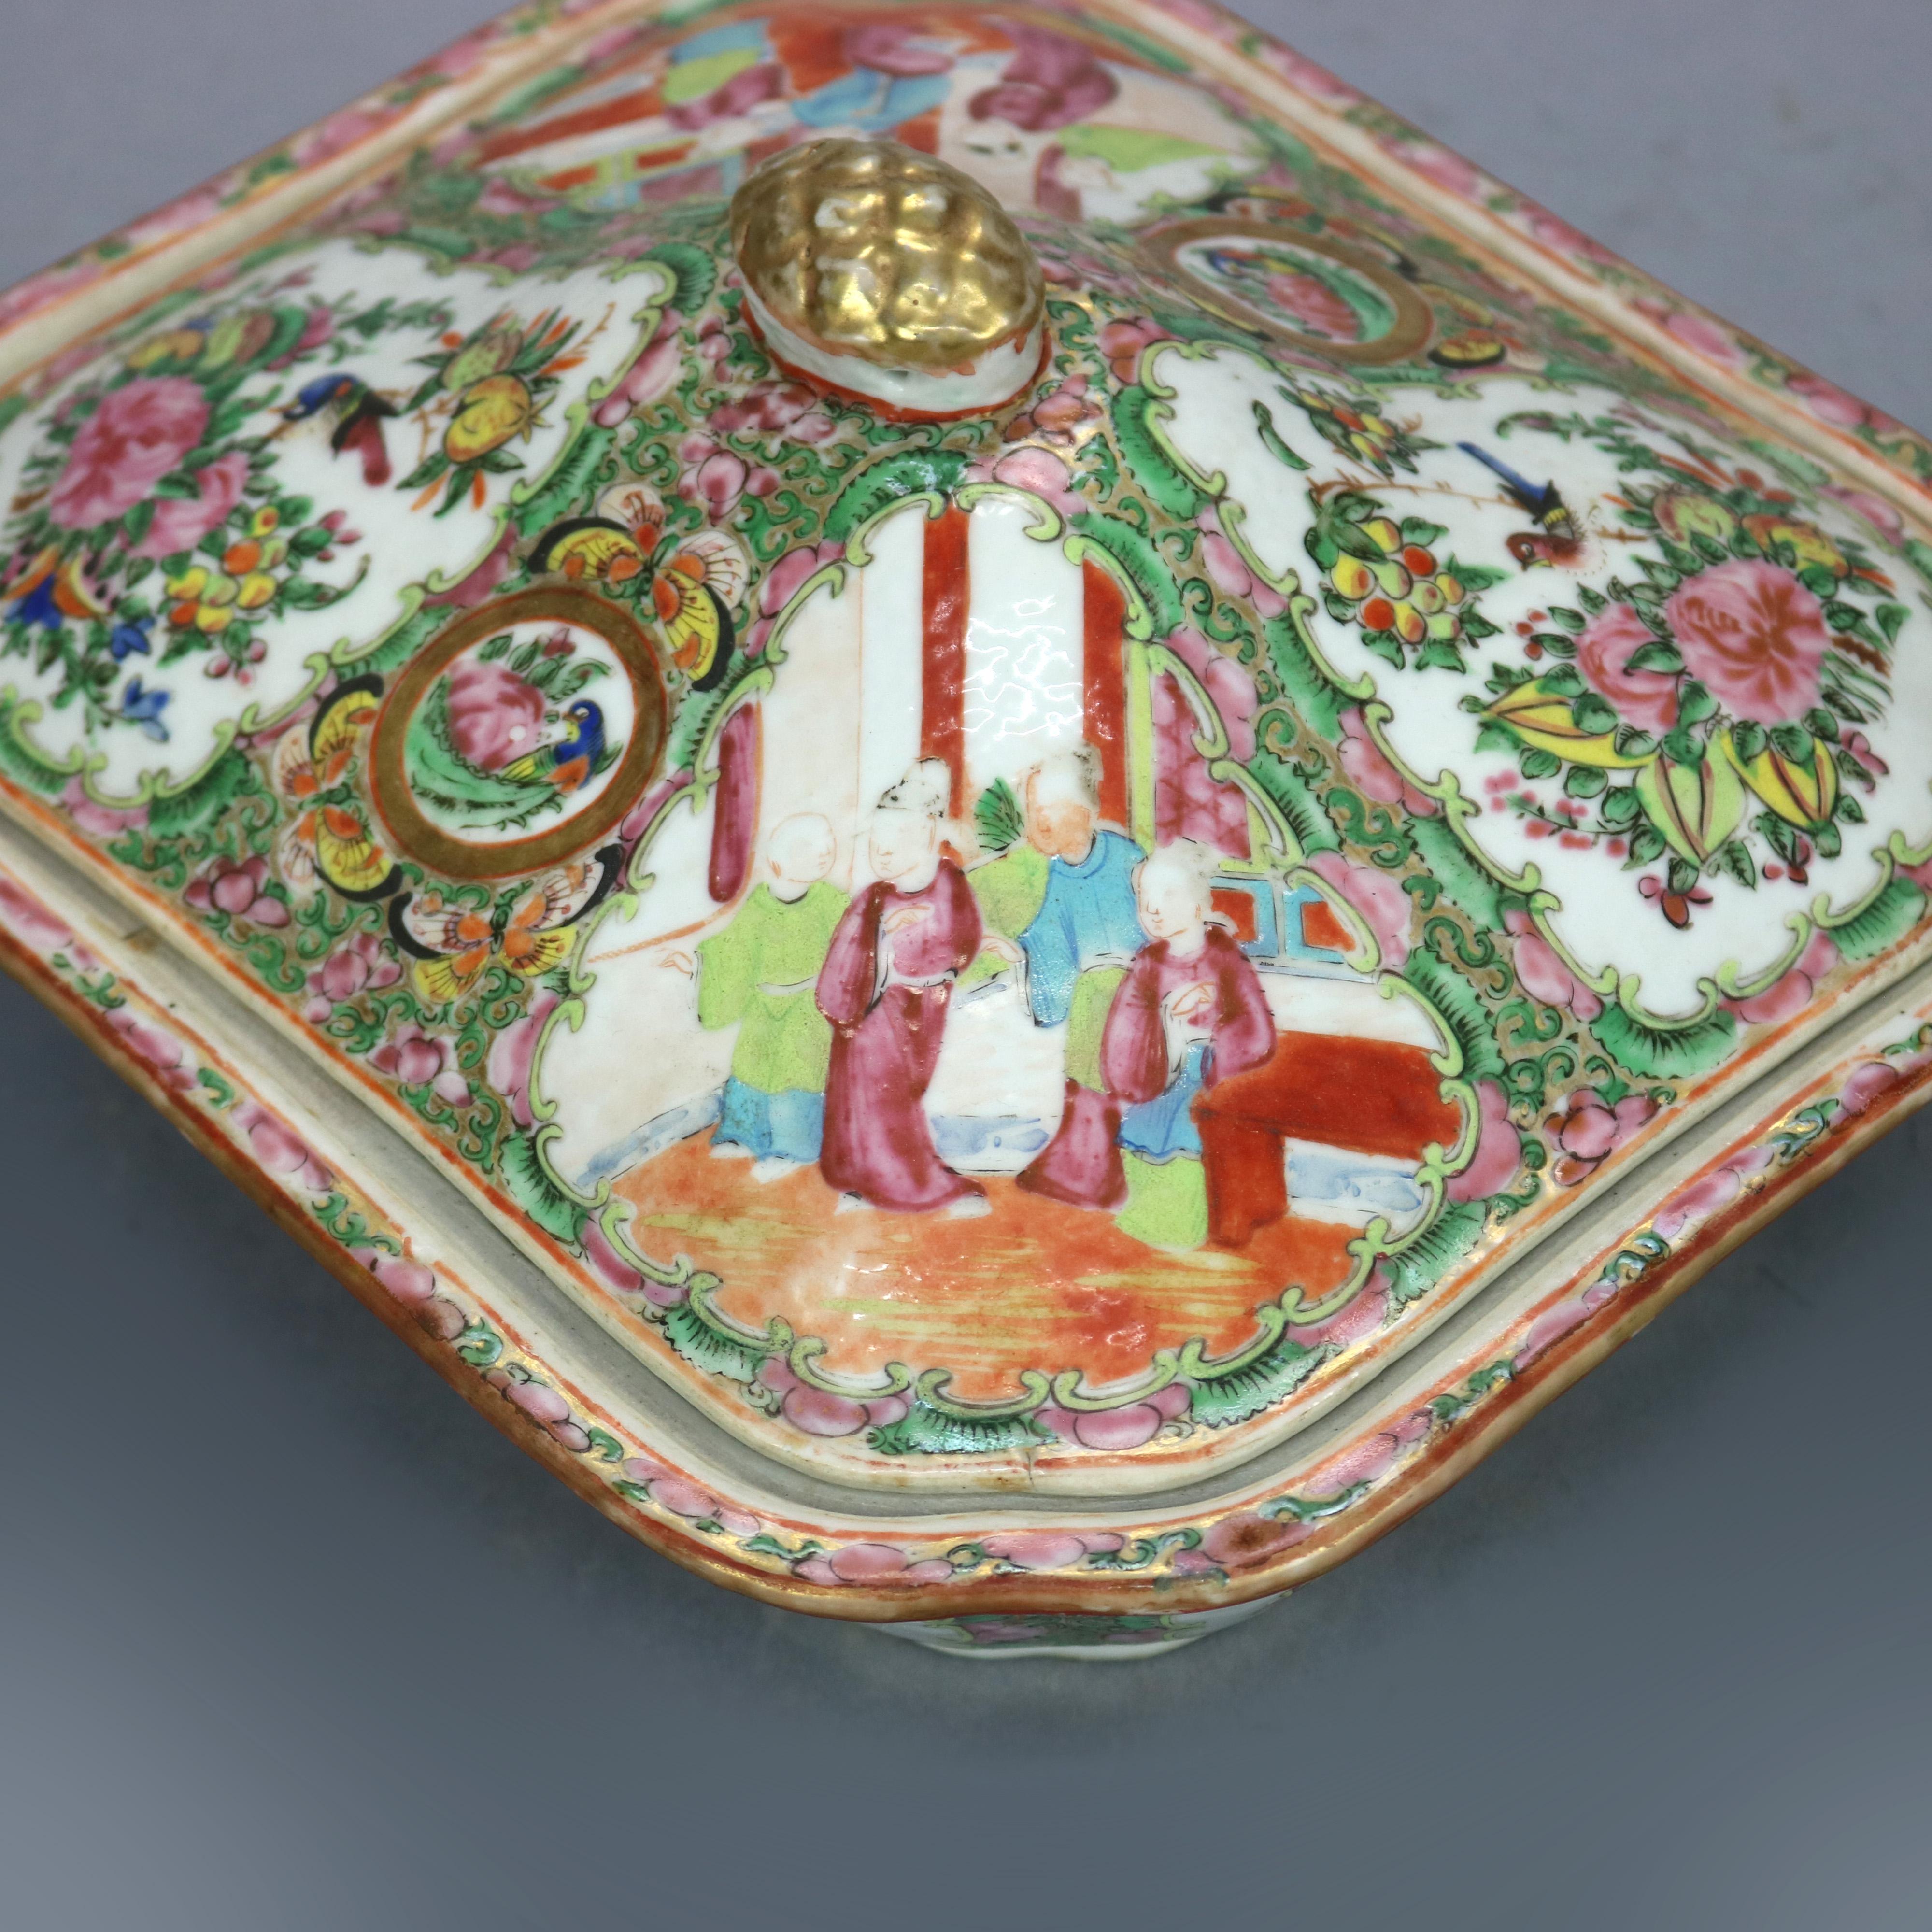 Fired Antique Rose Medallion Chinese Hand Enameled Porcelain Tureen, 19th Century